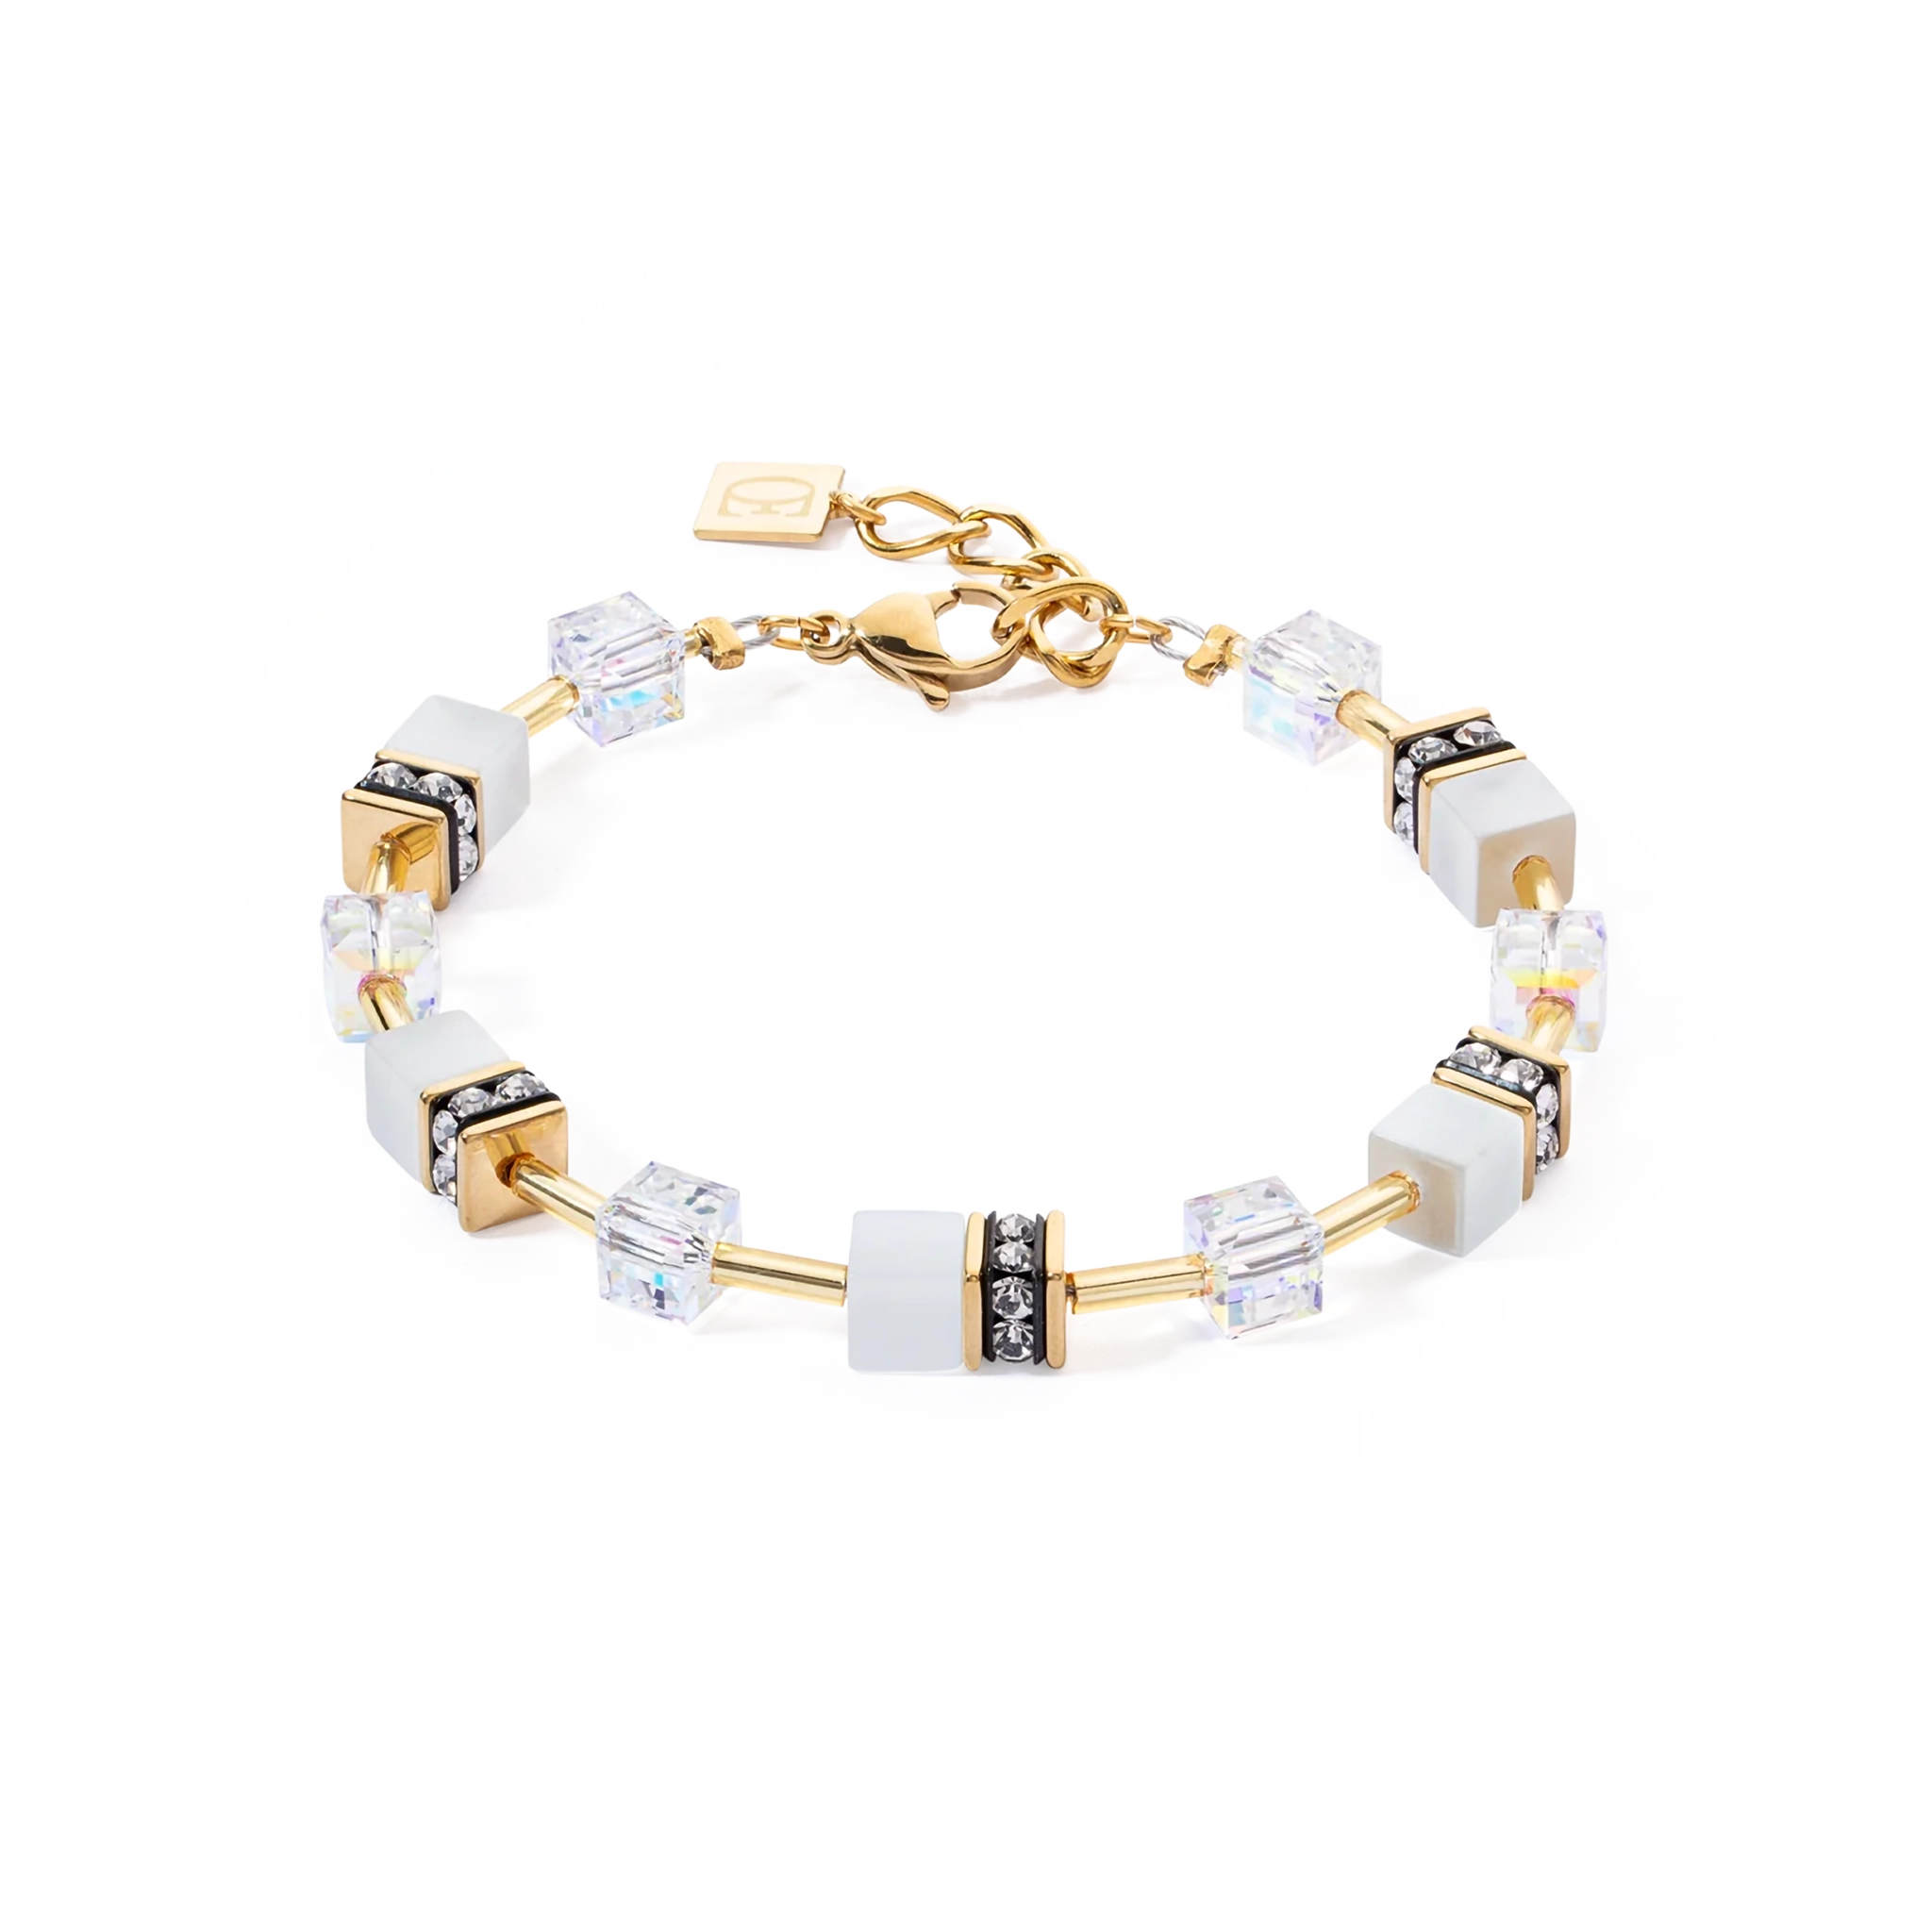 A gold steel bracelet with white cube beads and stones